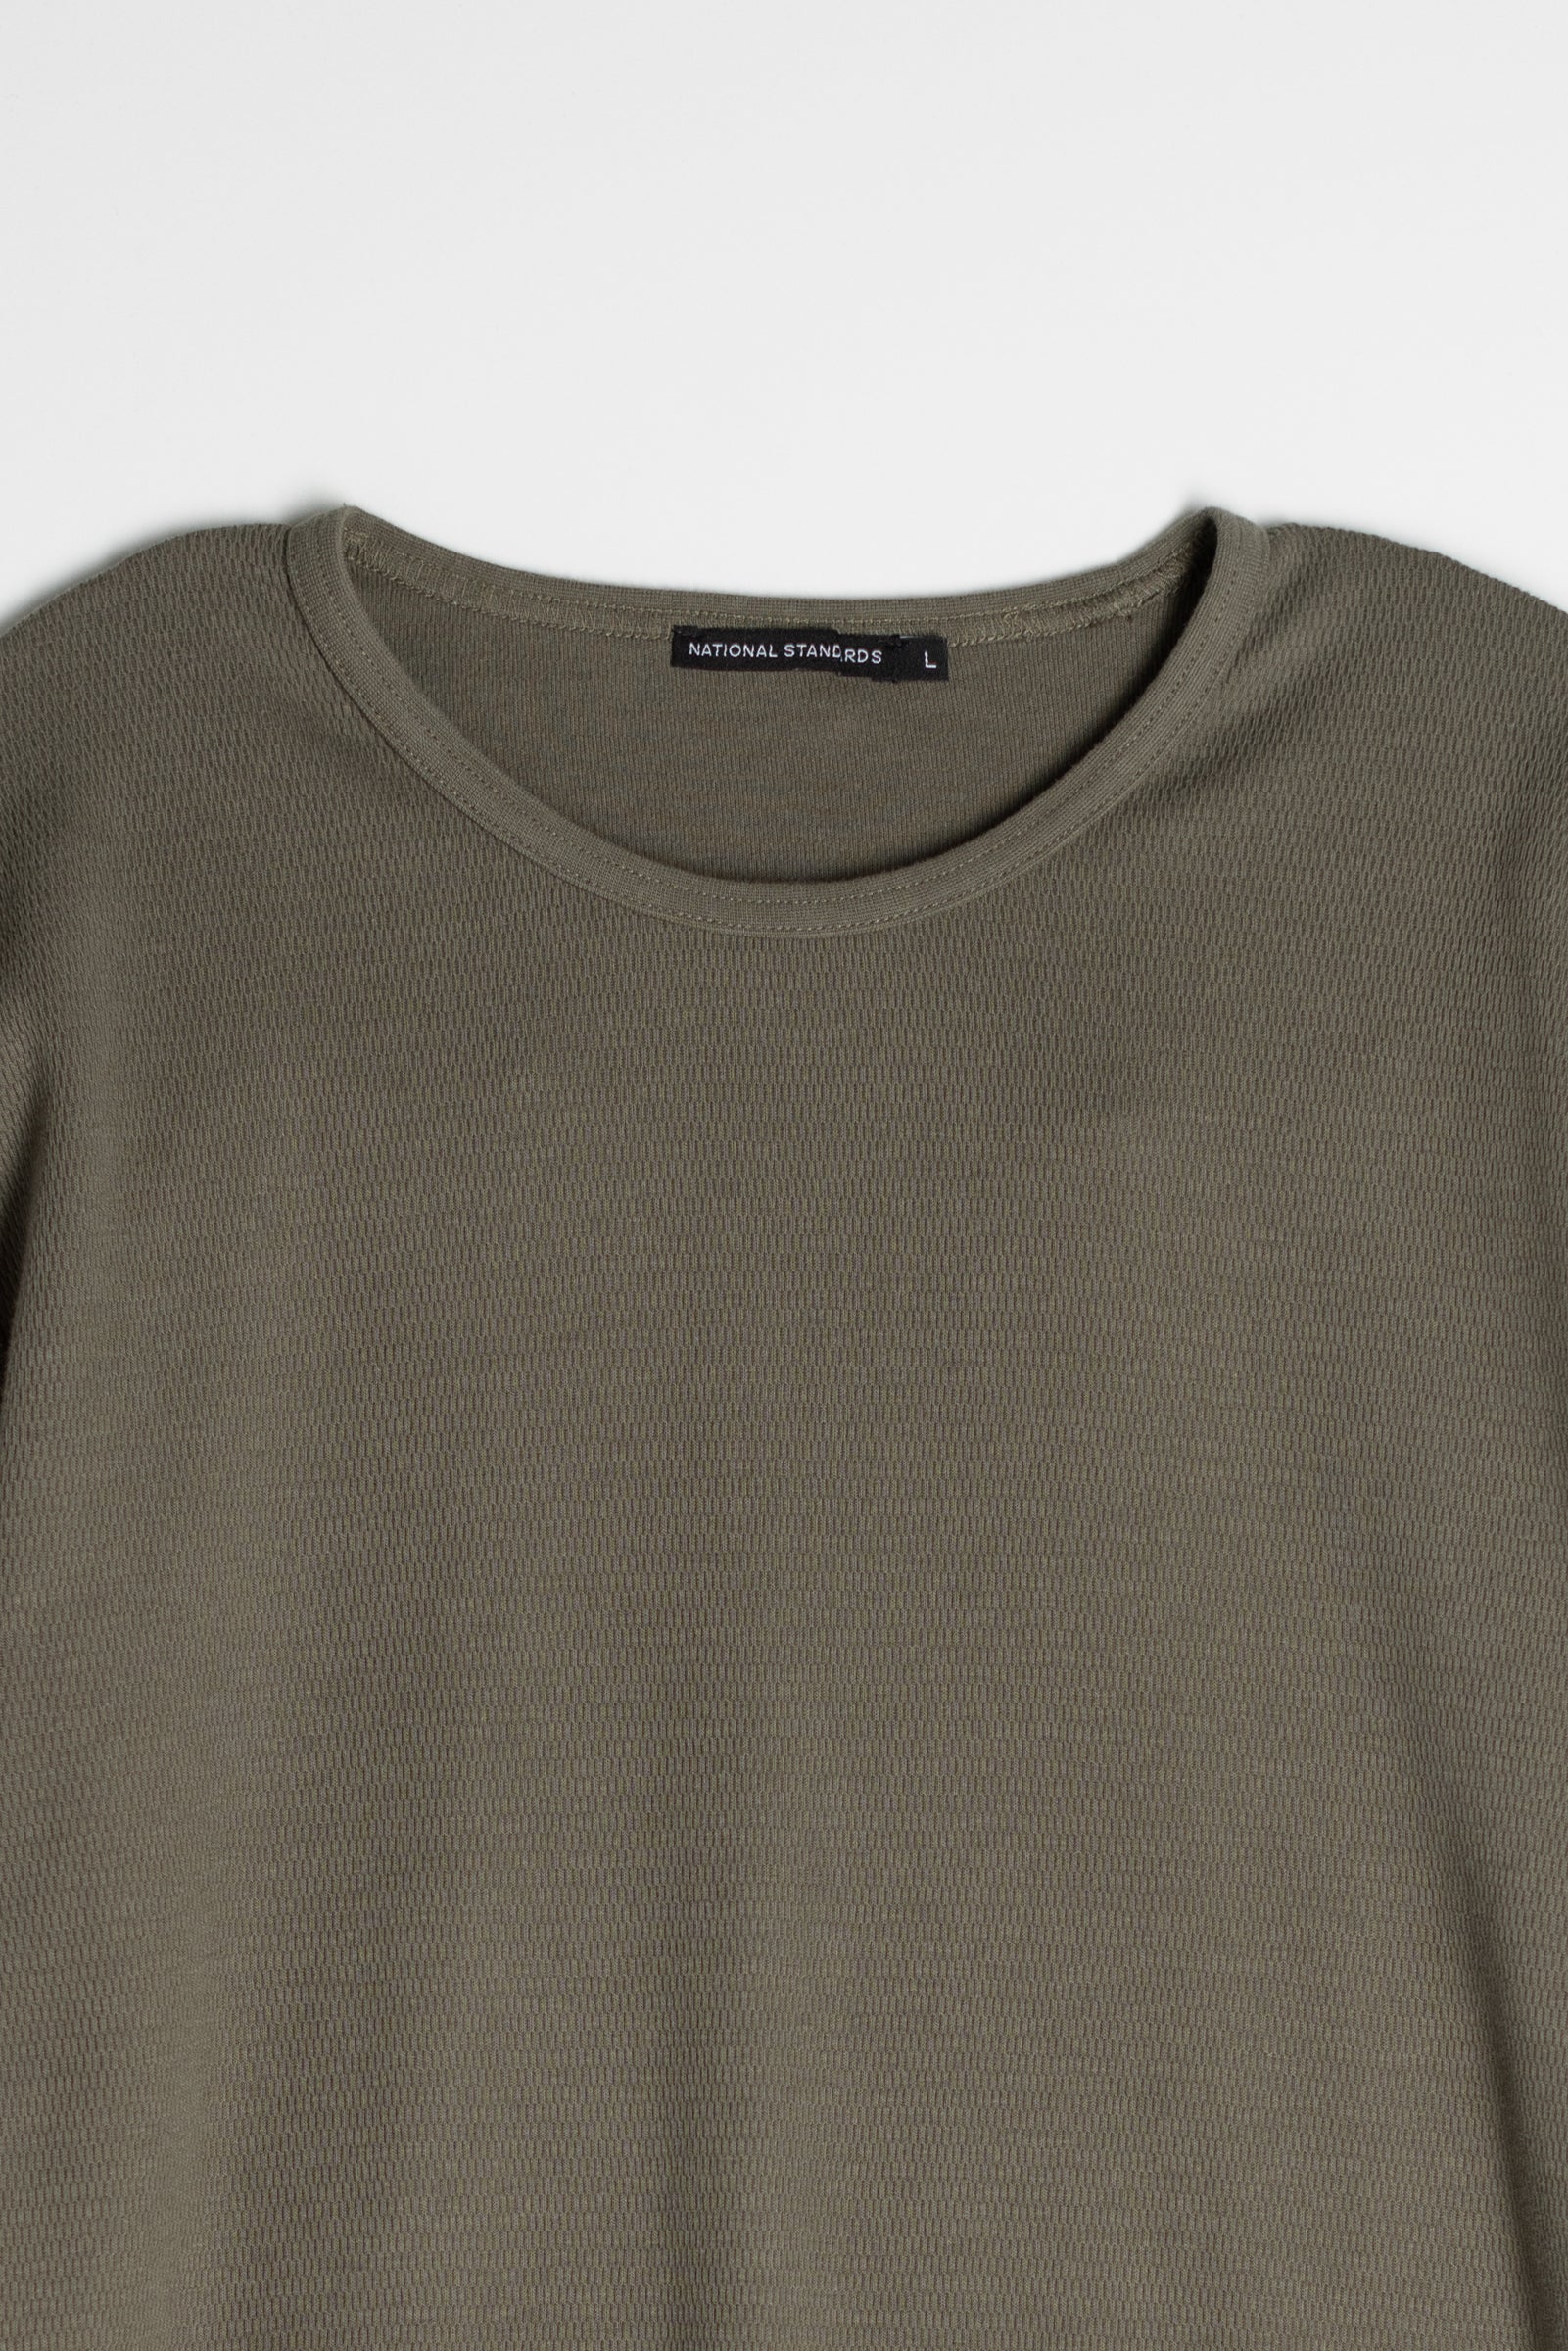 Mesh Thermal L/S Crew in Army Green 05